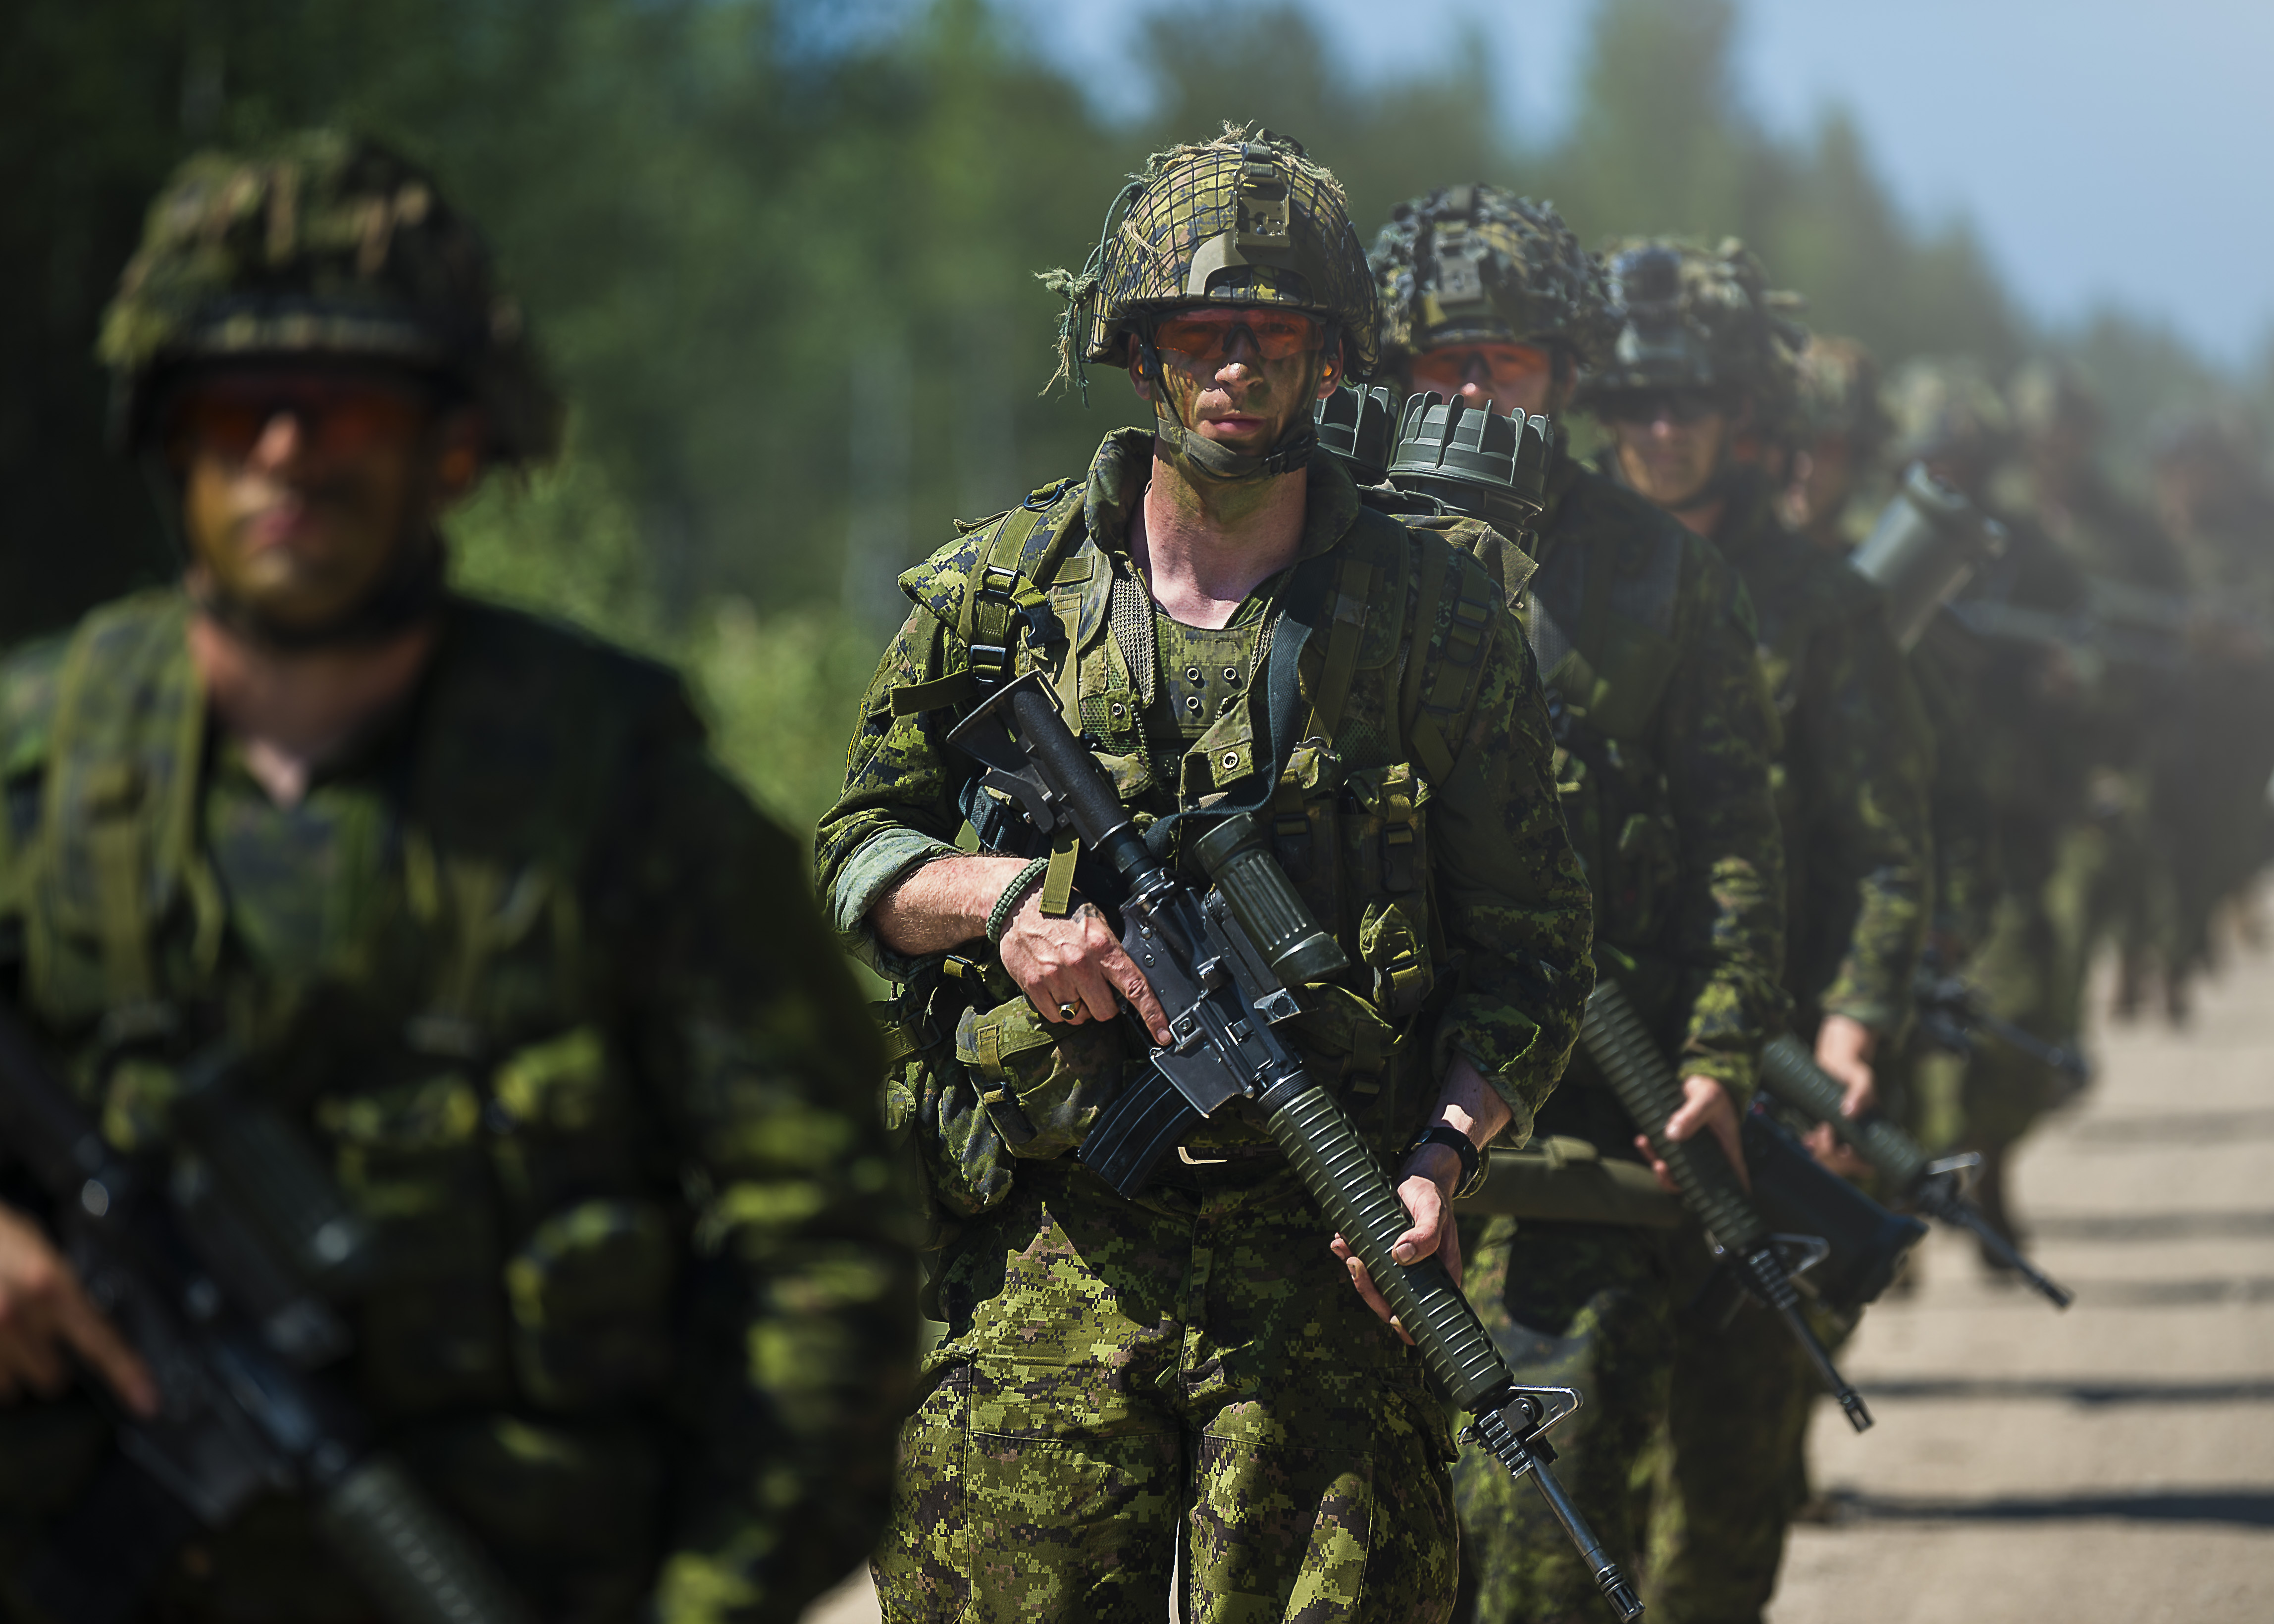 Training exercise will see Canadian Army Reserve soldiers march in Kingston